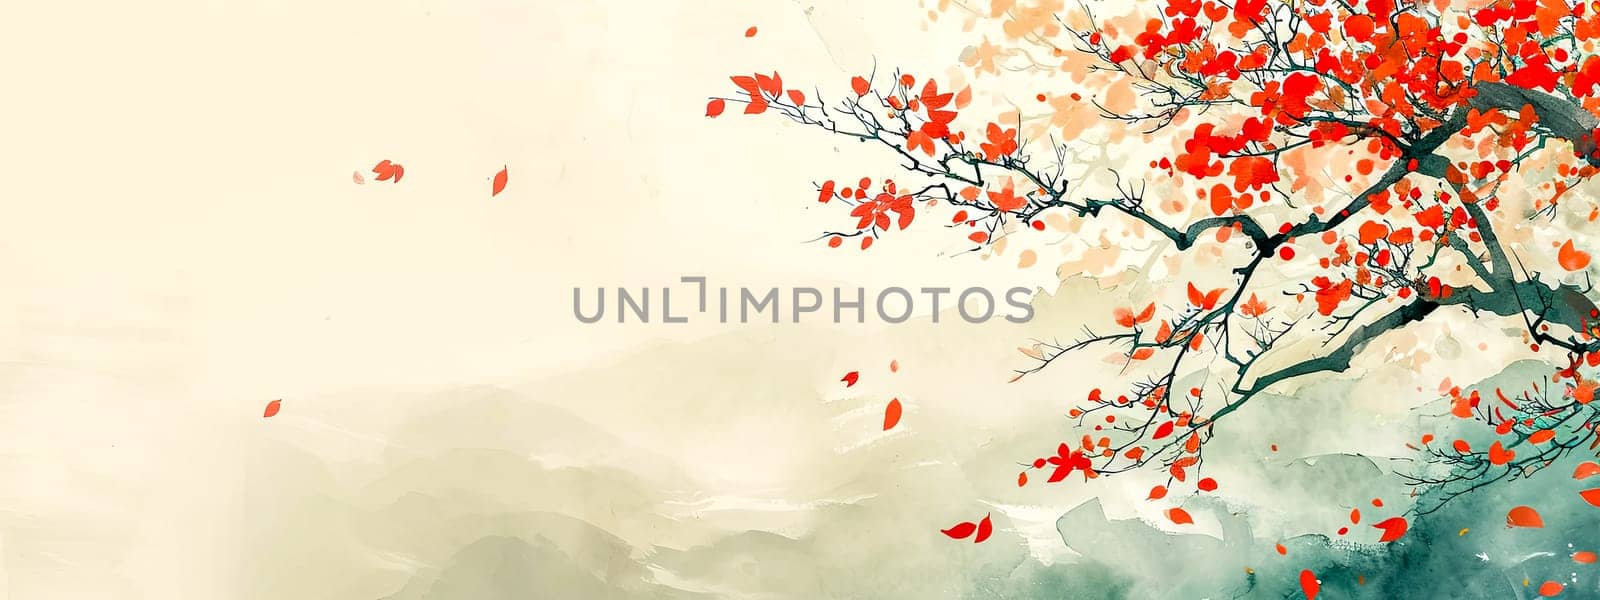 Autumn tranquility in an East Asian-inspired tree painting by Edophoto